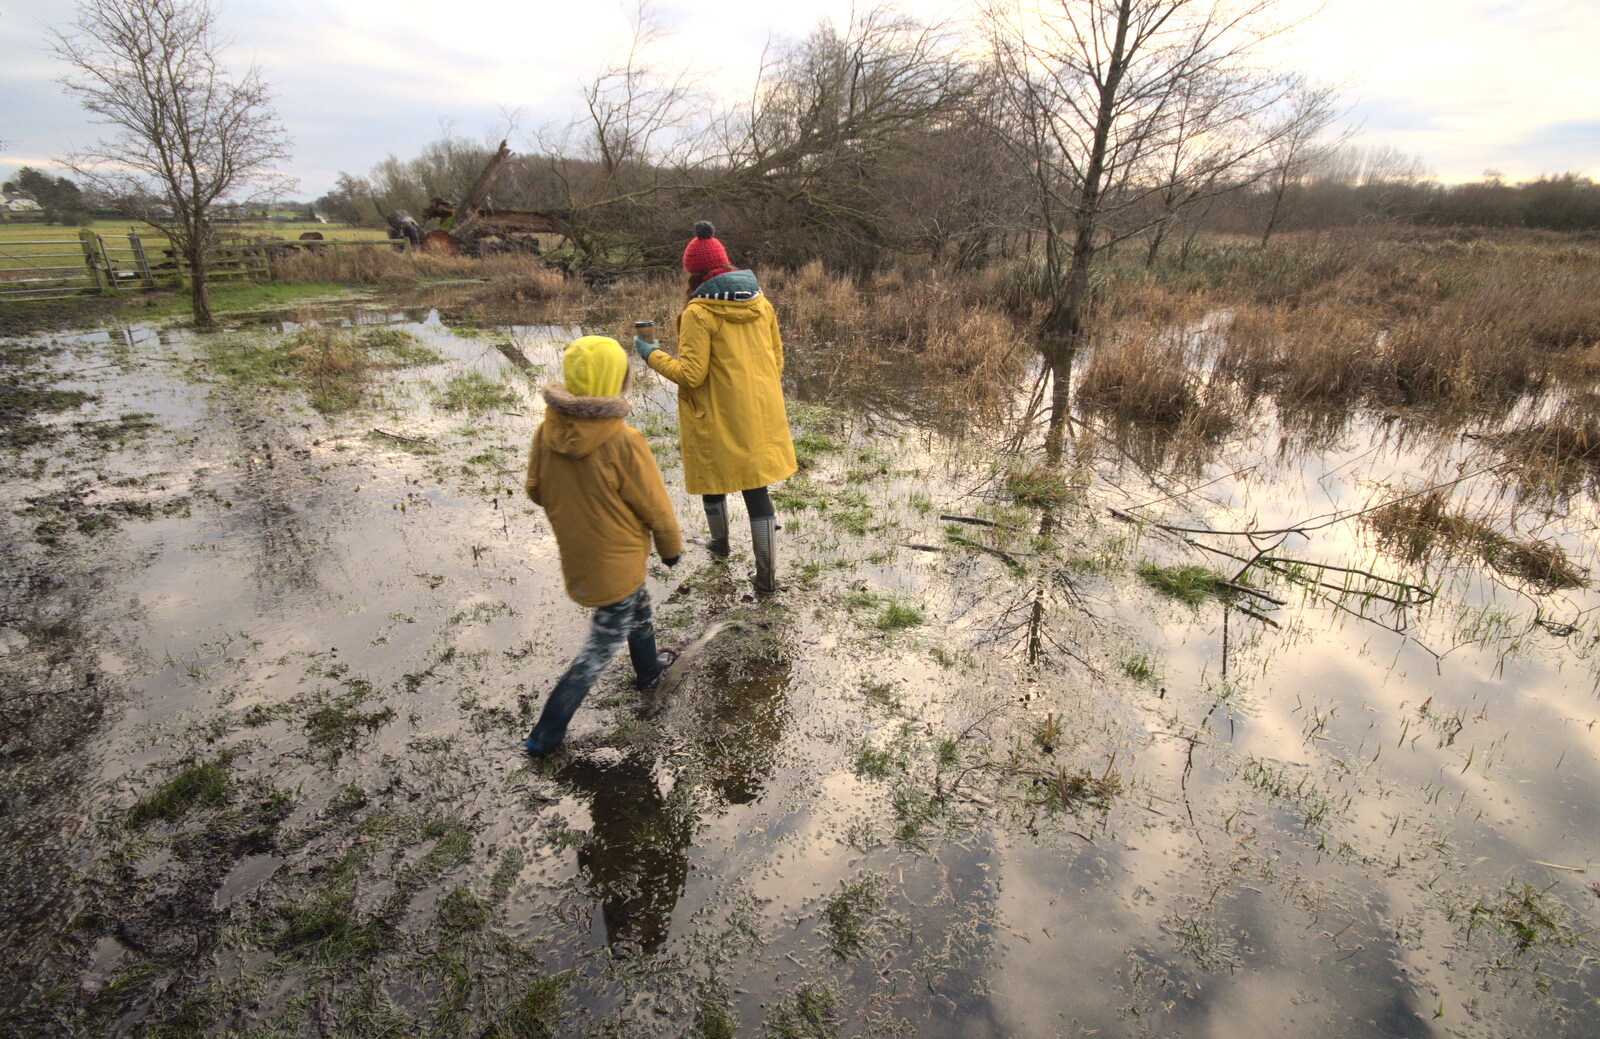 We negotiate a particularly-flooded section from A Walk Around Redgrave and Lopham Fen, Redgrave, Suffolk - 3rd January 2021